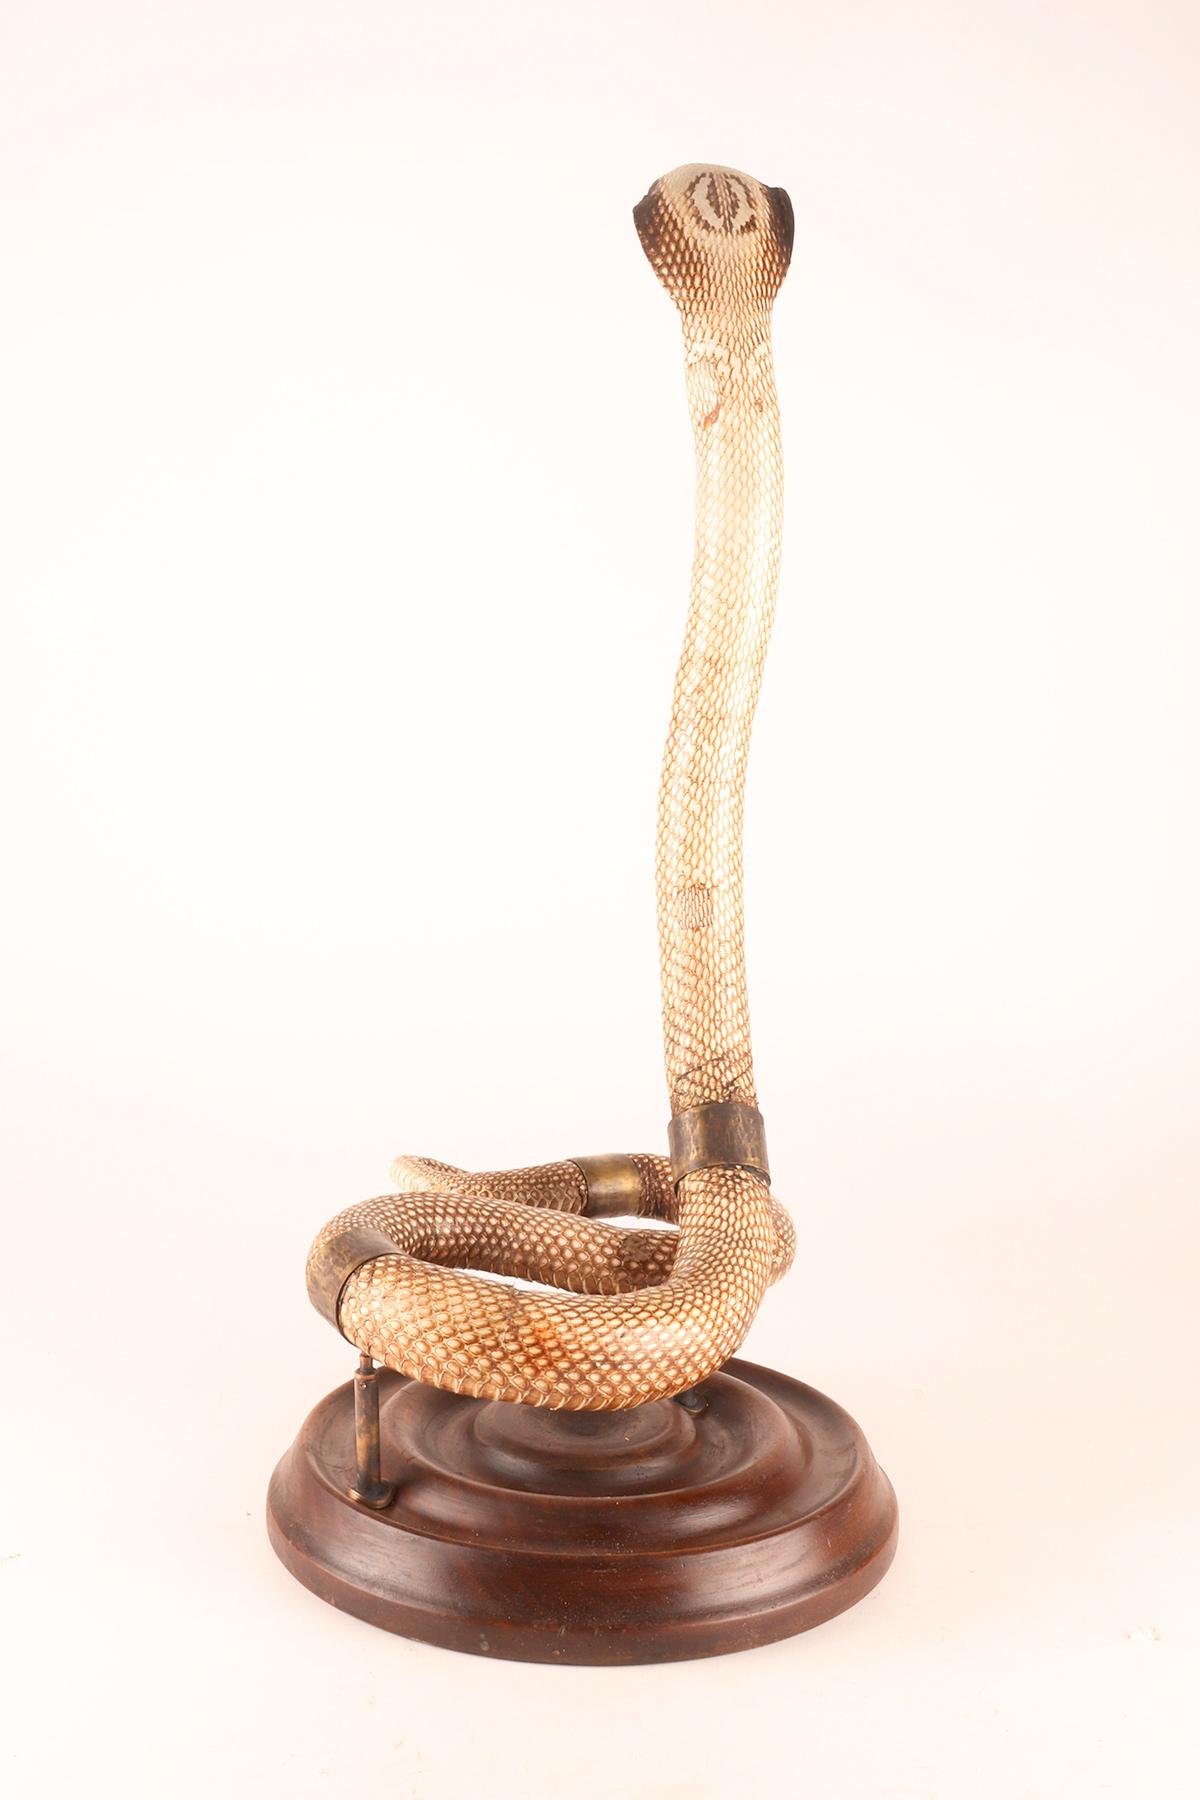 A specimen of Hemachatus hemachatus snake taxidermy, Italy 1890. For Sale 2